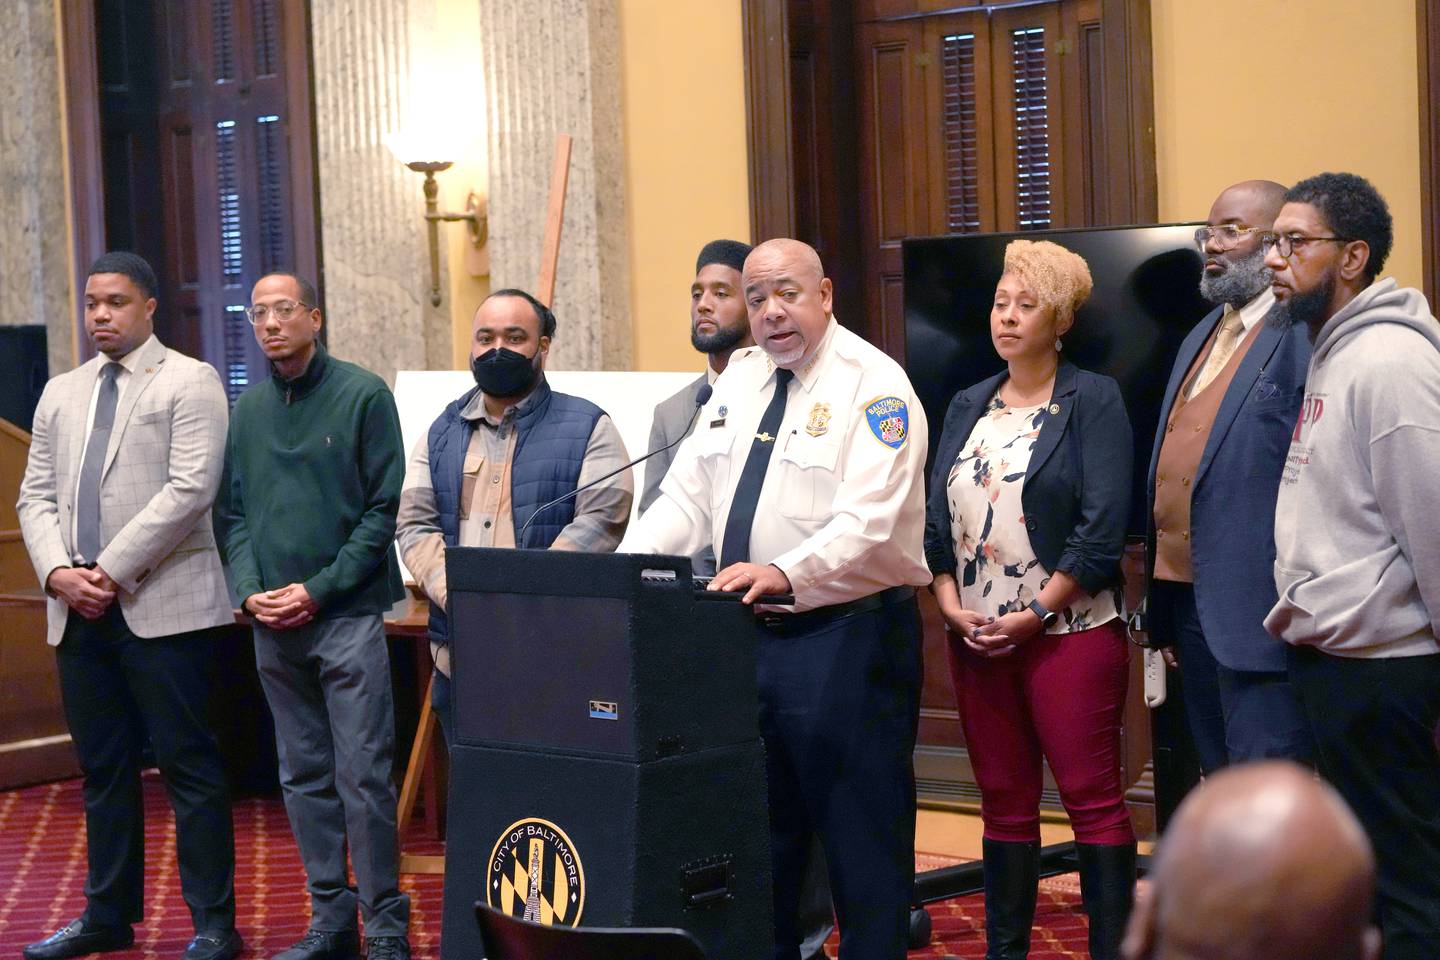 Baltimore Police commissioner Michael Harrison speaks during a city announcement for plans tp expand the Group Violence Reduction Strategy from the west policing districts into one or more additional policing precinct by early next year.